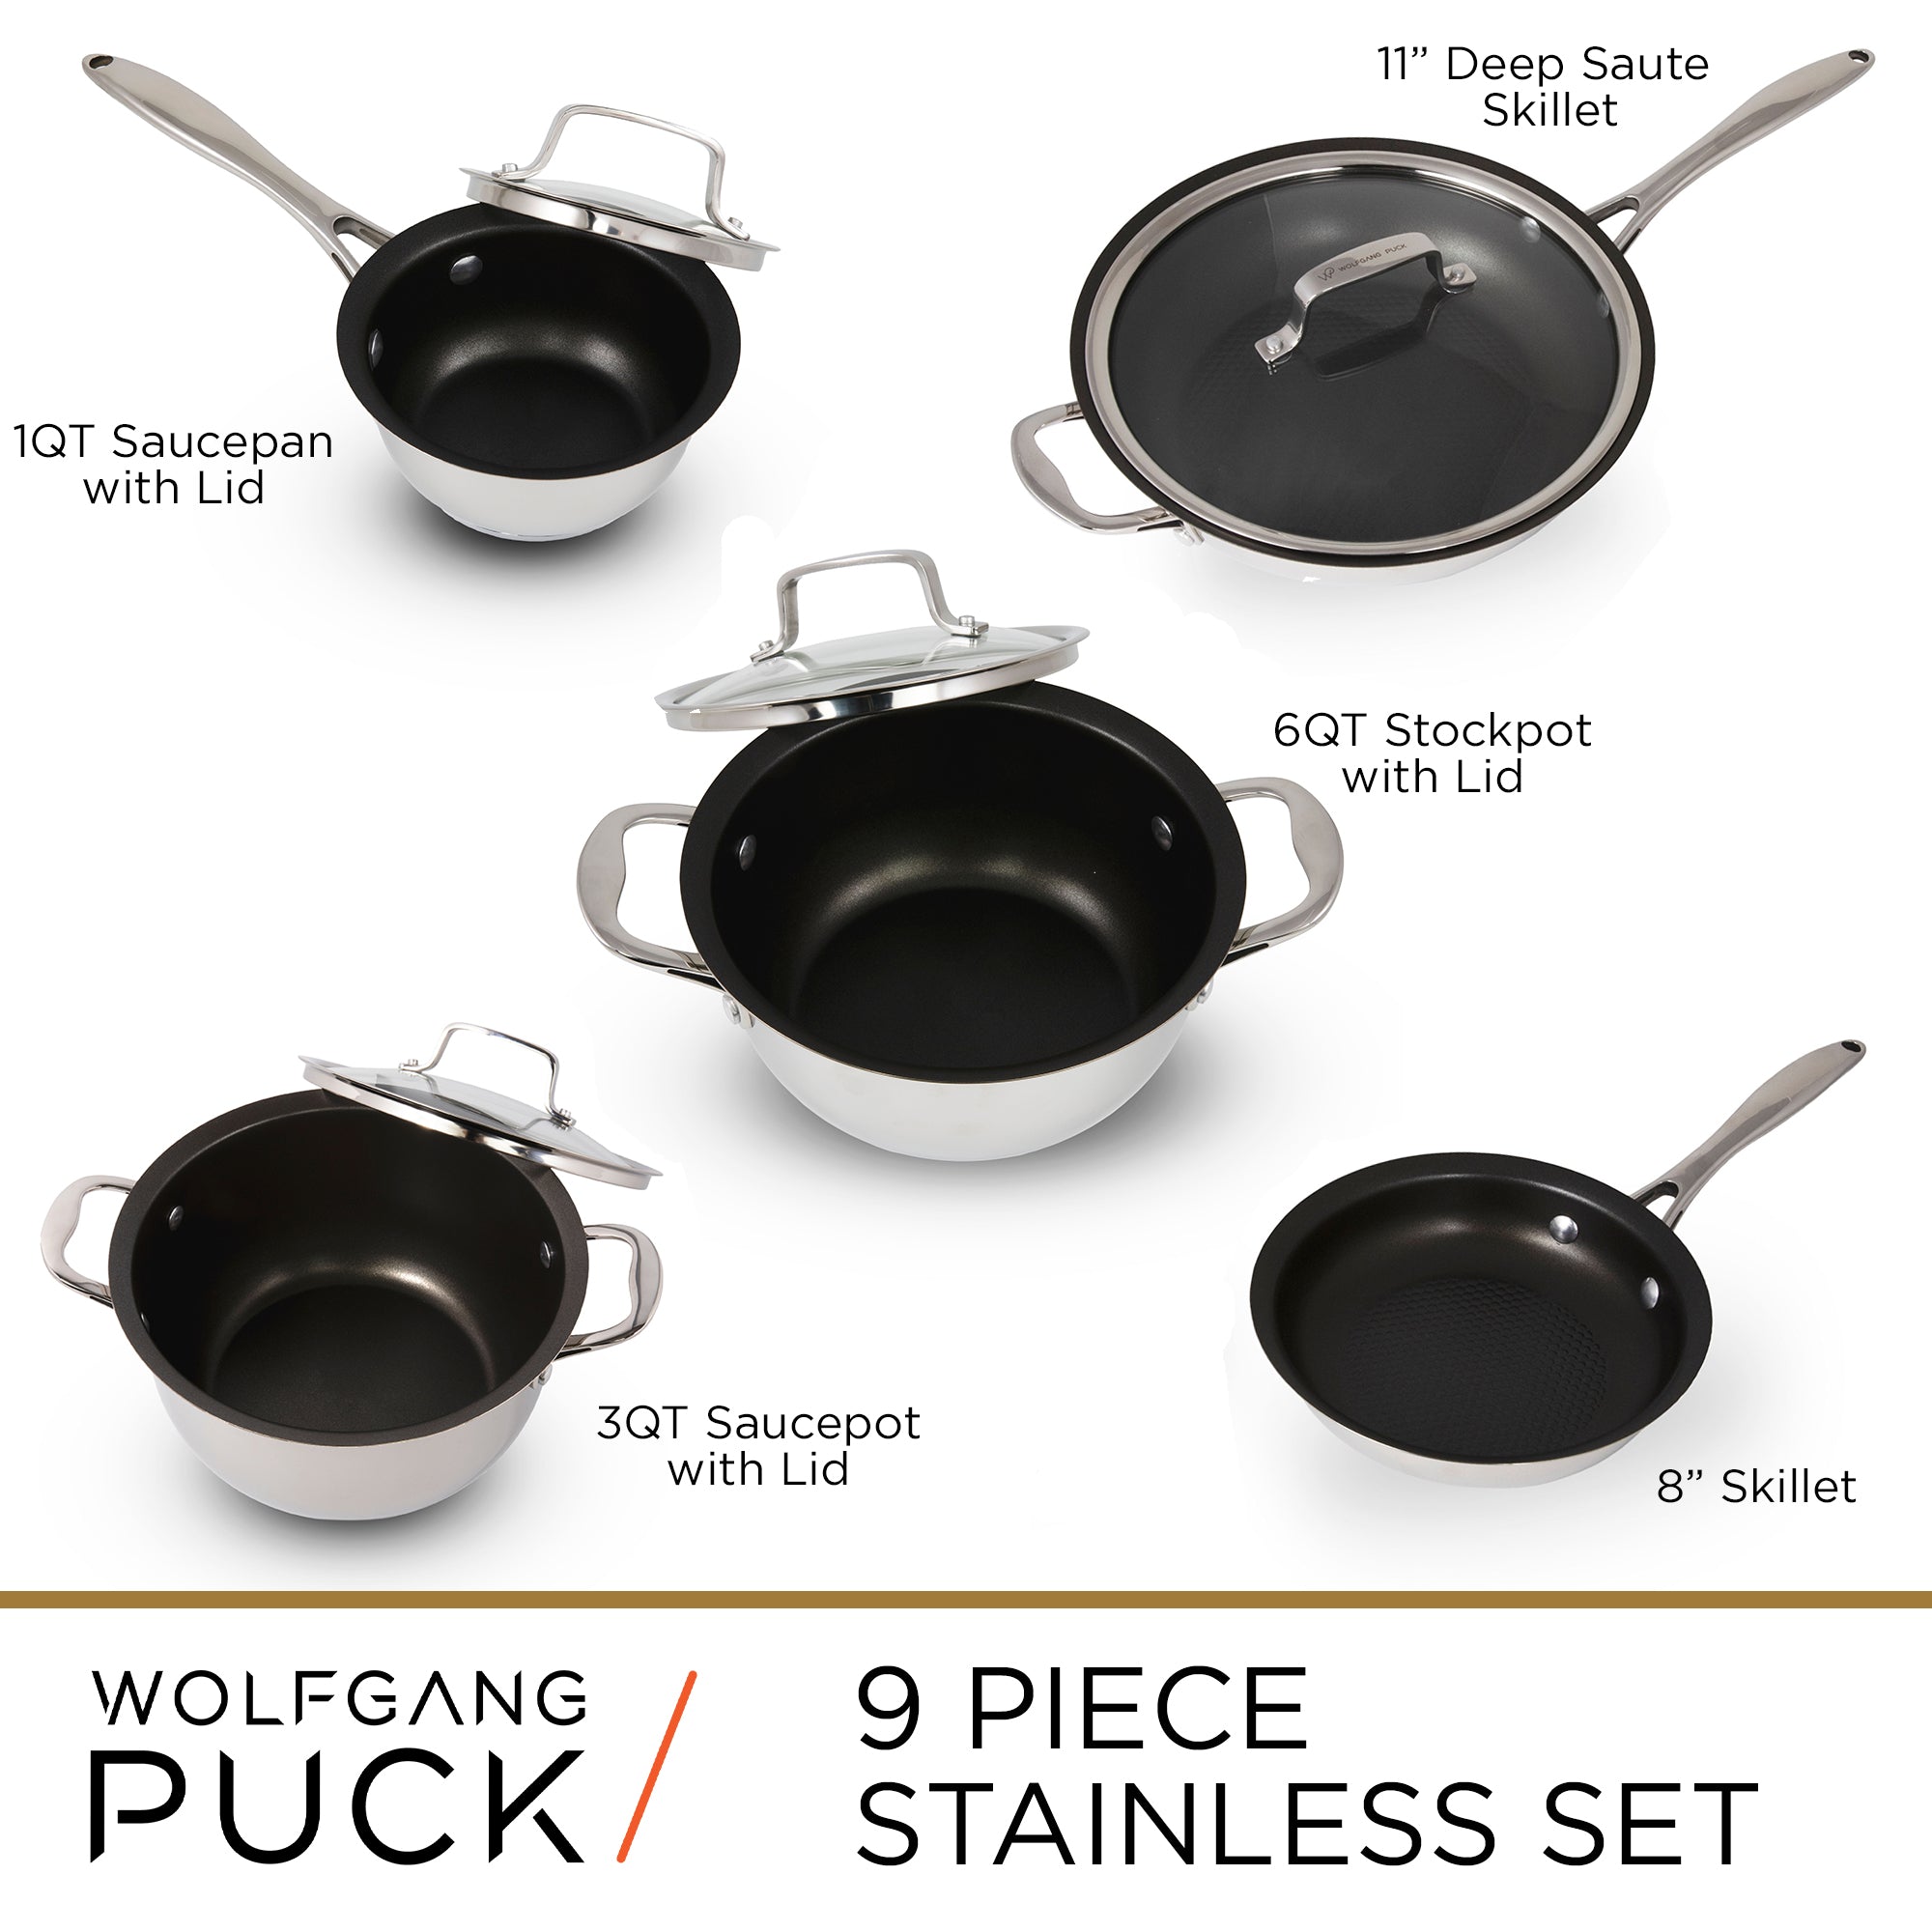 Luxury Professional “304” Grade Stainless Steel Complete Cookware Set -  Premium Design - All Stovetops Incl. Induction (9 pcs - Bronze)